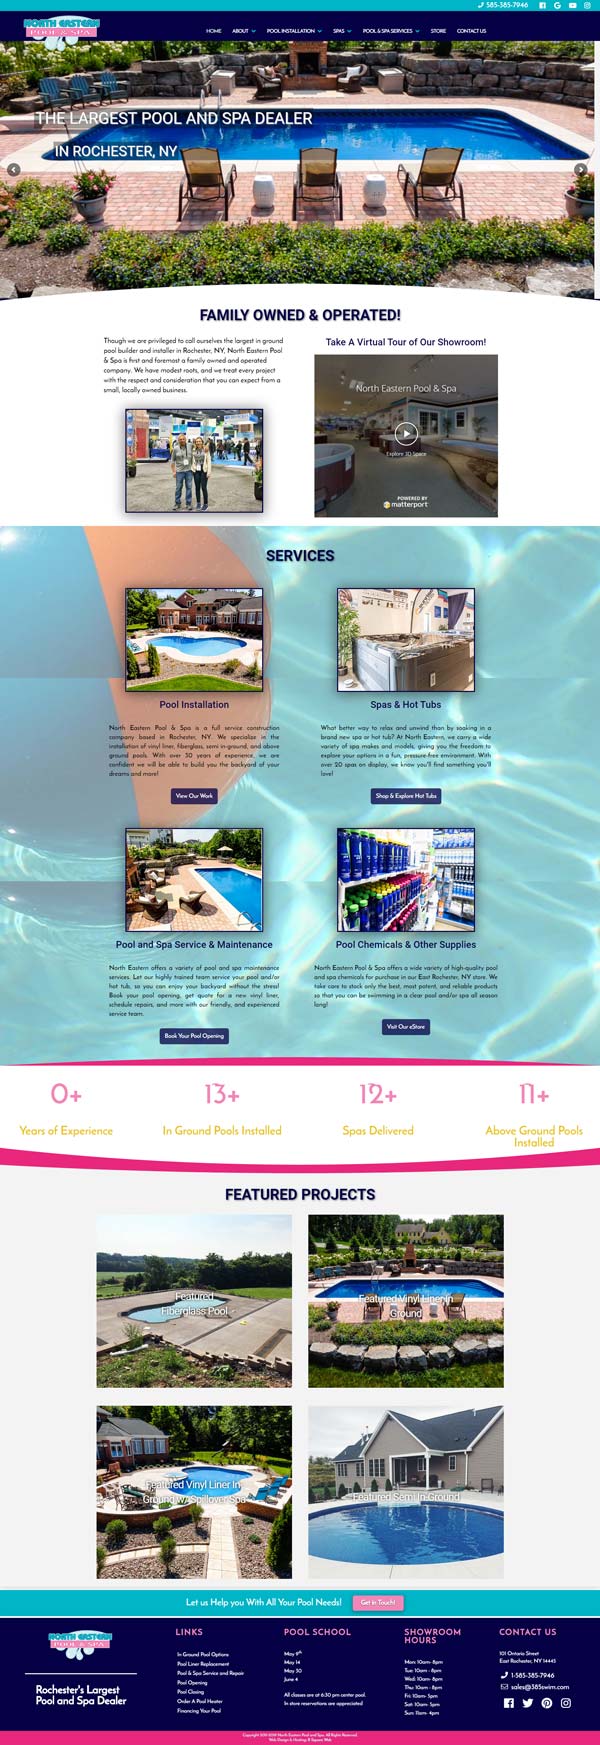 North Eastern Pools & Spas home page screen print